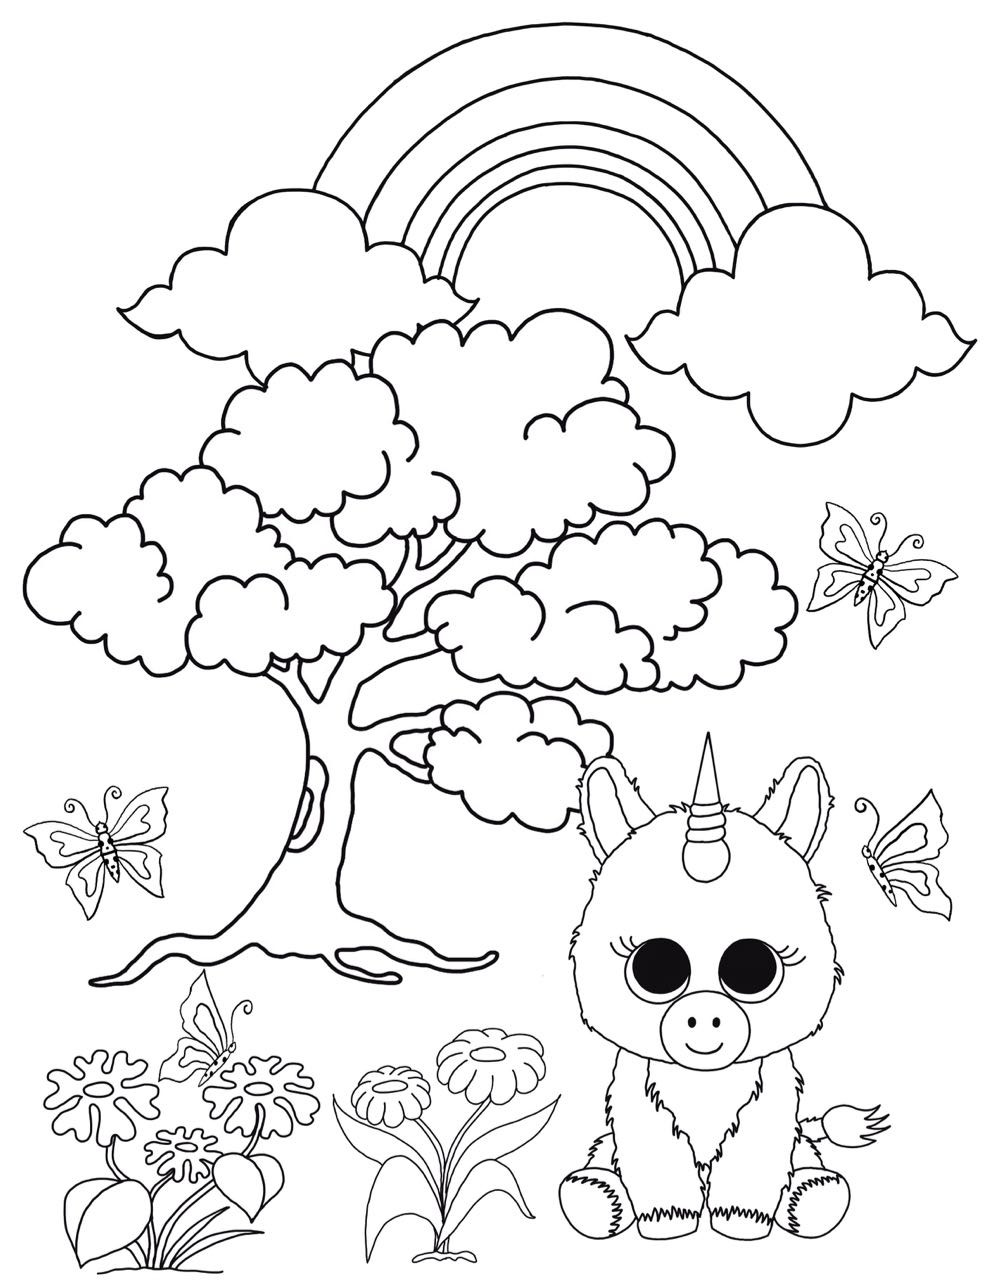 Ty Beanie Boos Coloring Pages At Getcolorings.com | Free Printable